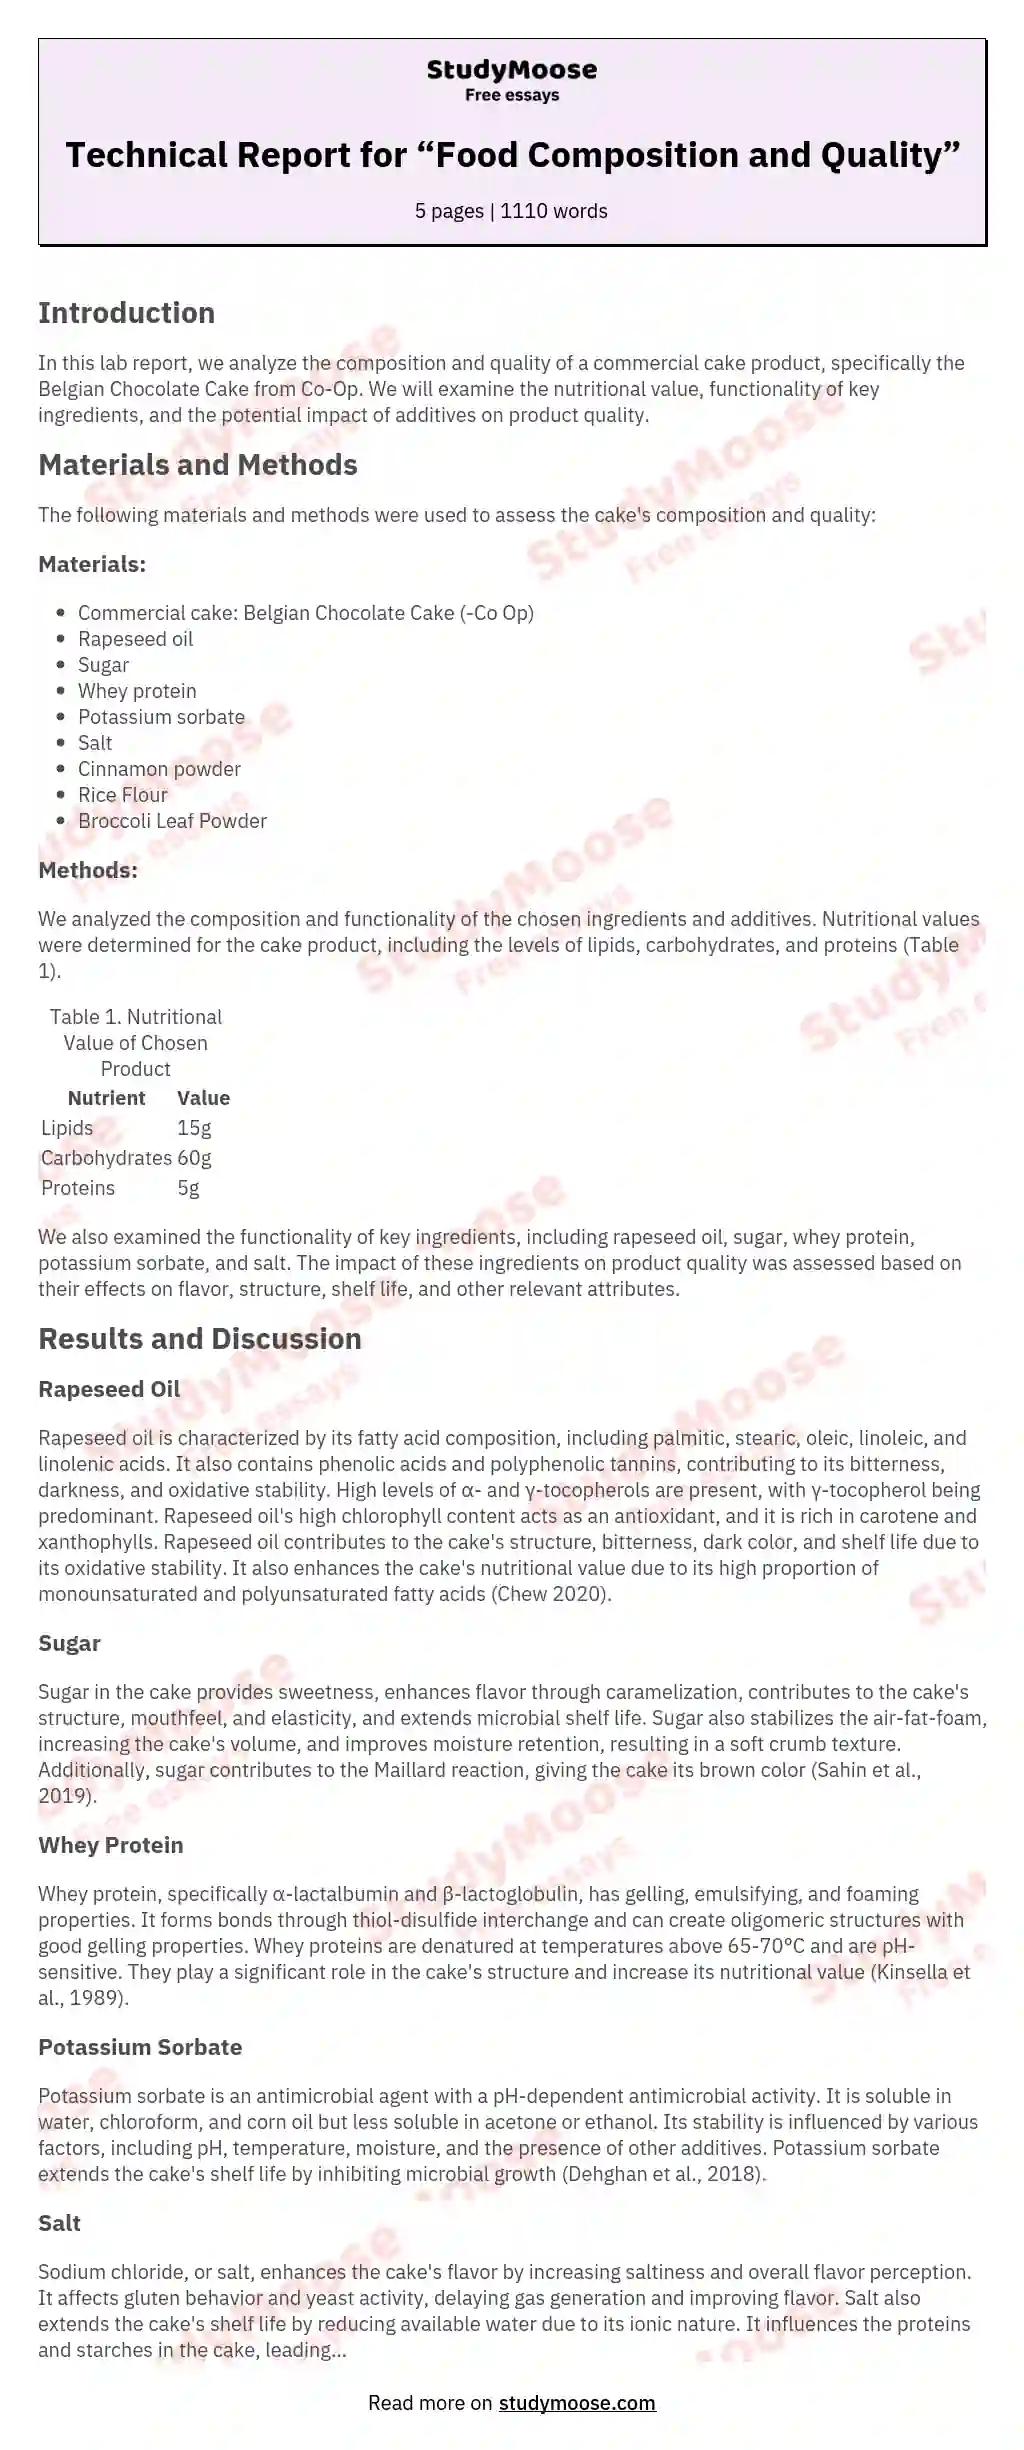 Technical Report for “Food Composition and Quality” essay